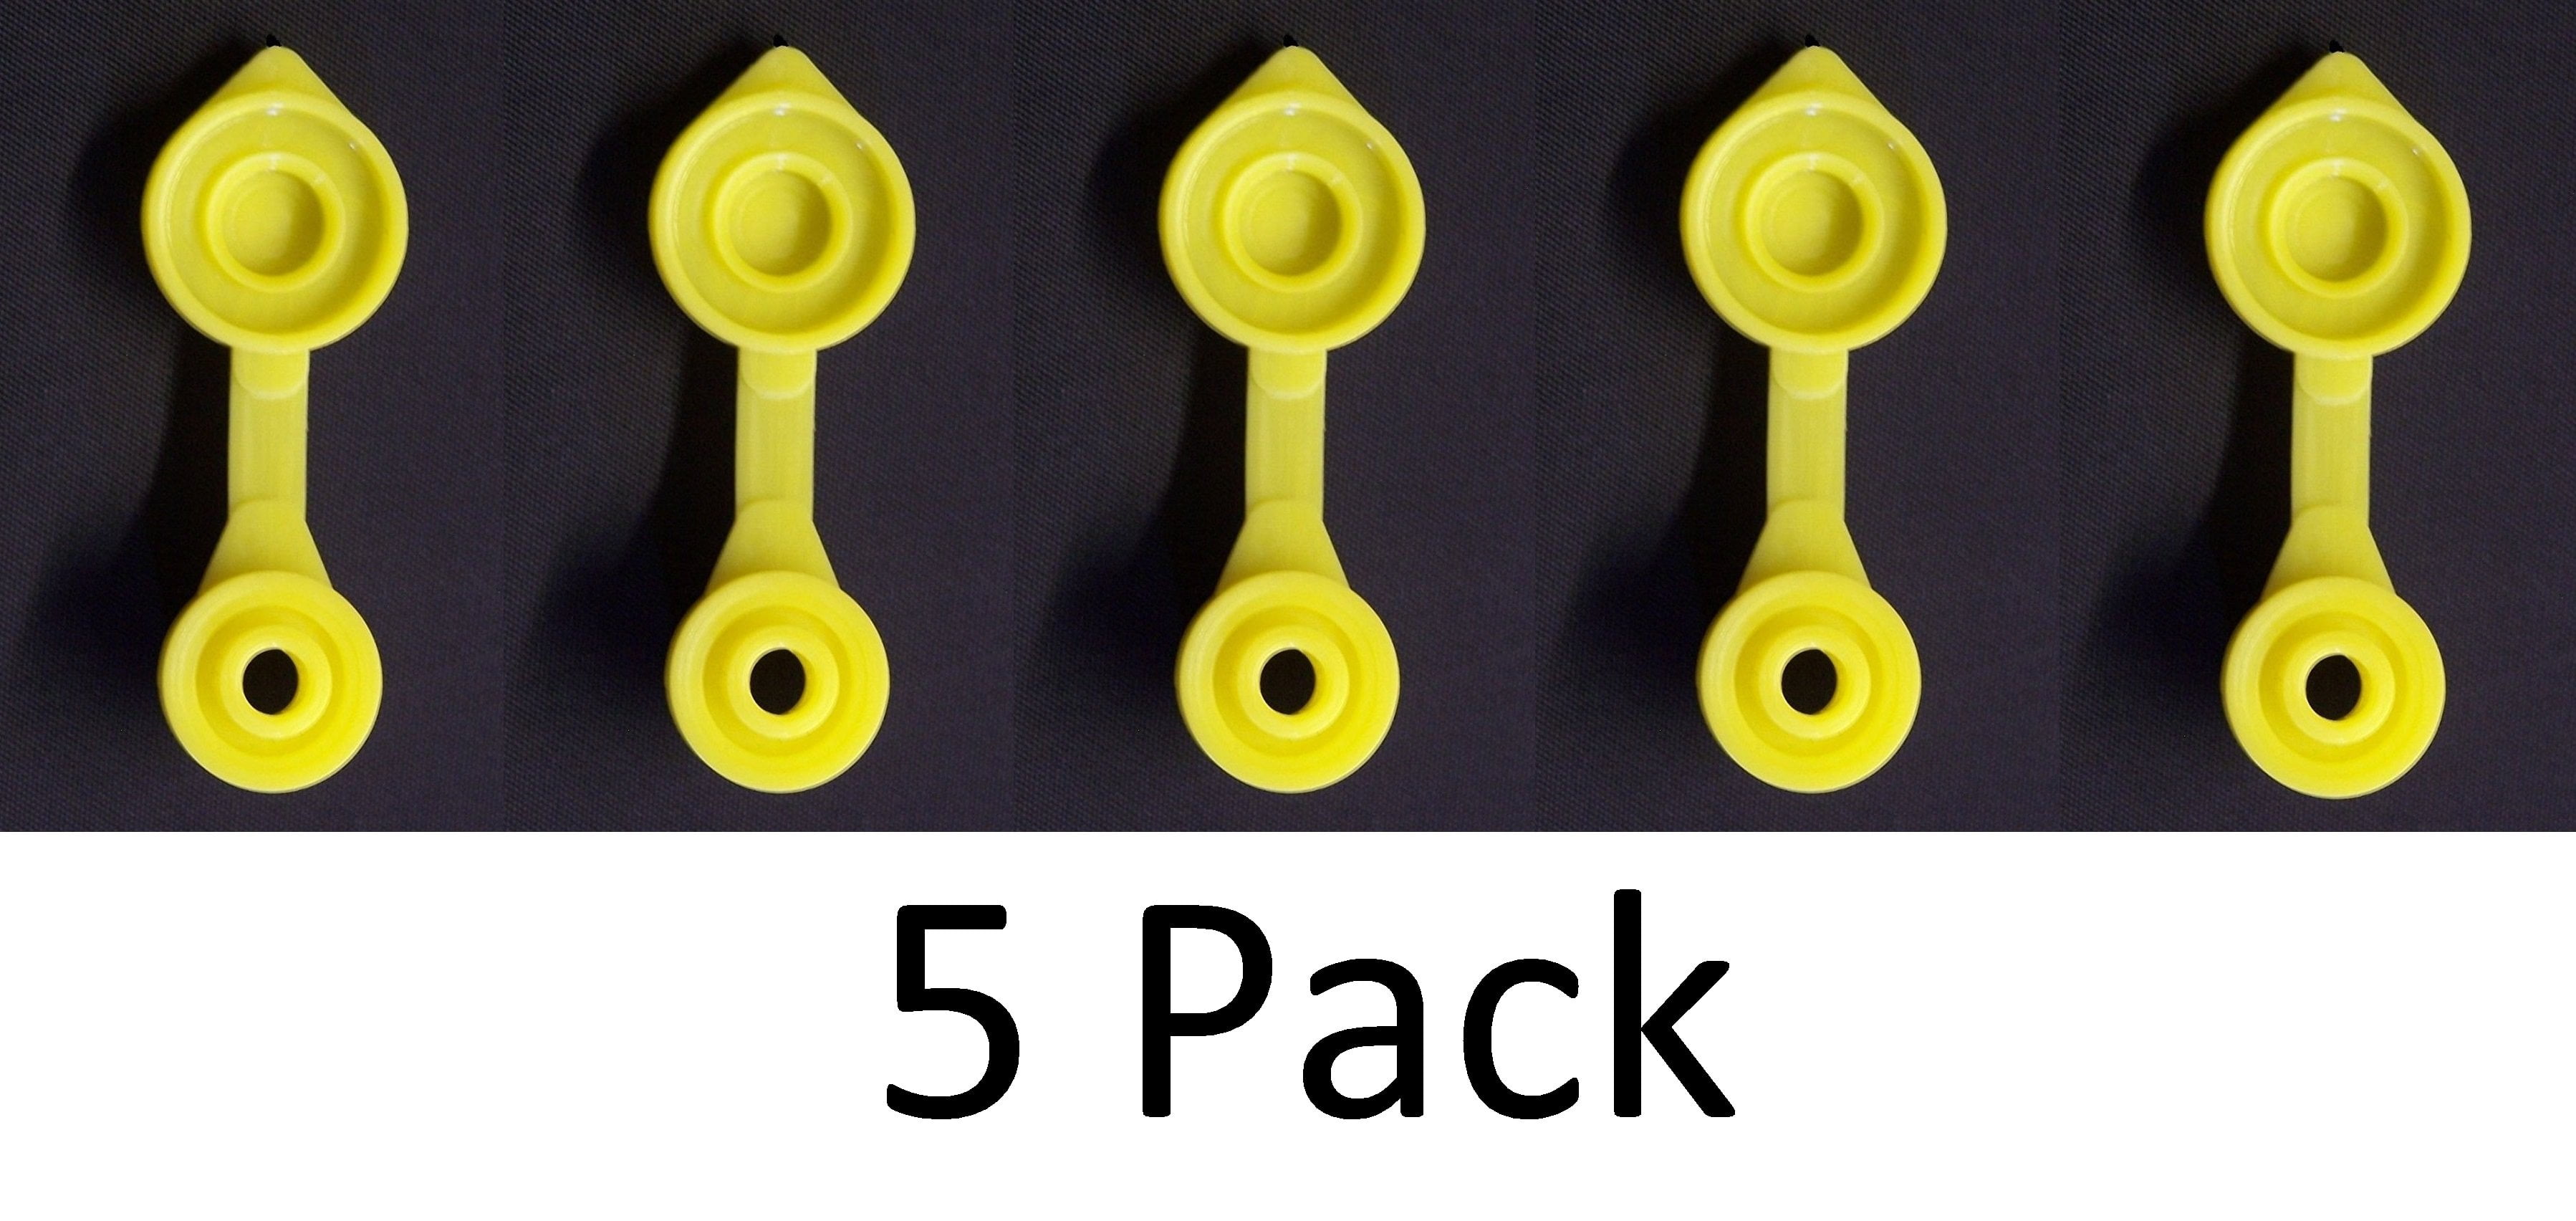 5 Pcs Yellow Fuel Gas Can Jug Vent Cap Ft Plastic and Metal Jugs MADE IN THE USA 